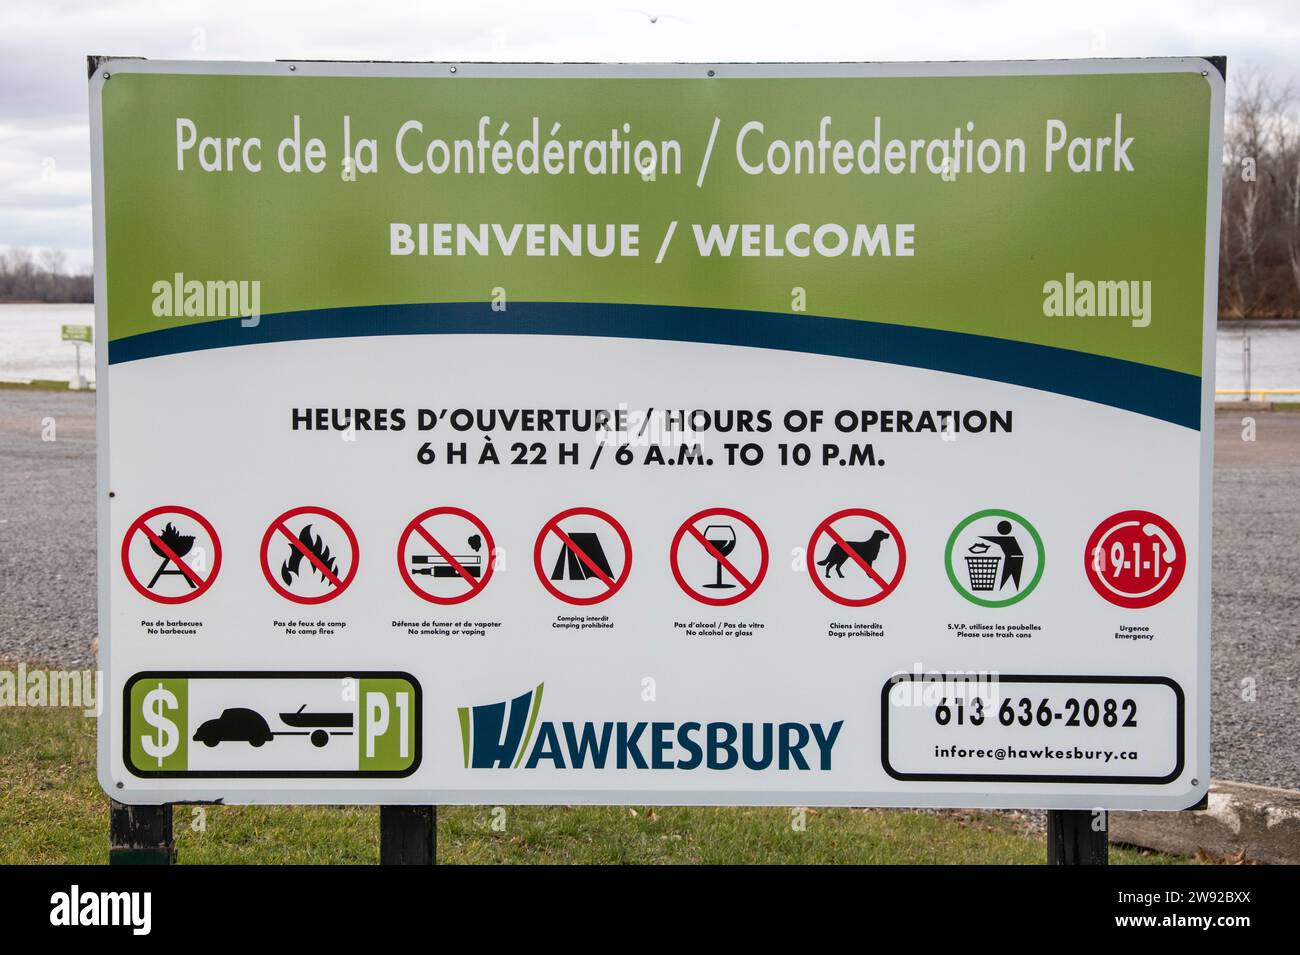 Welcome to Confederation Park sign in Hawkesbury, Ontario, Canada Stock Photo